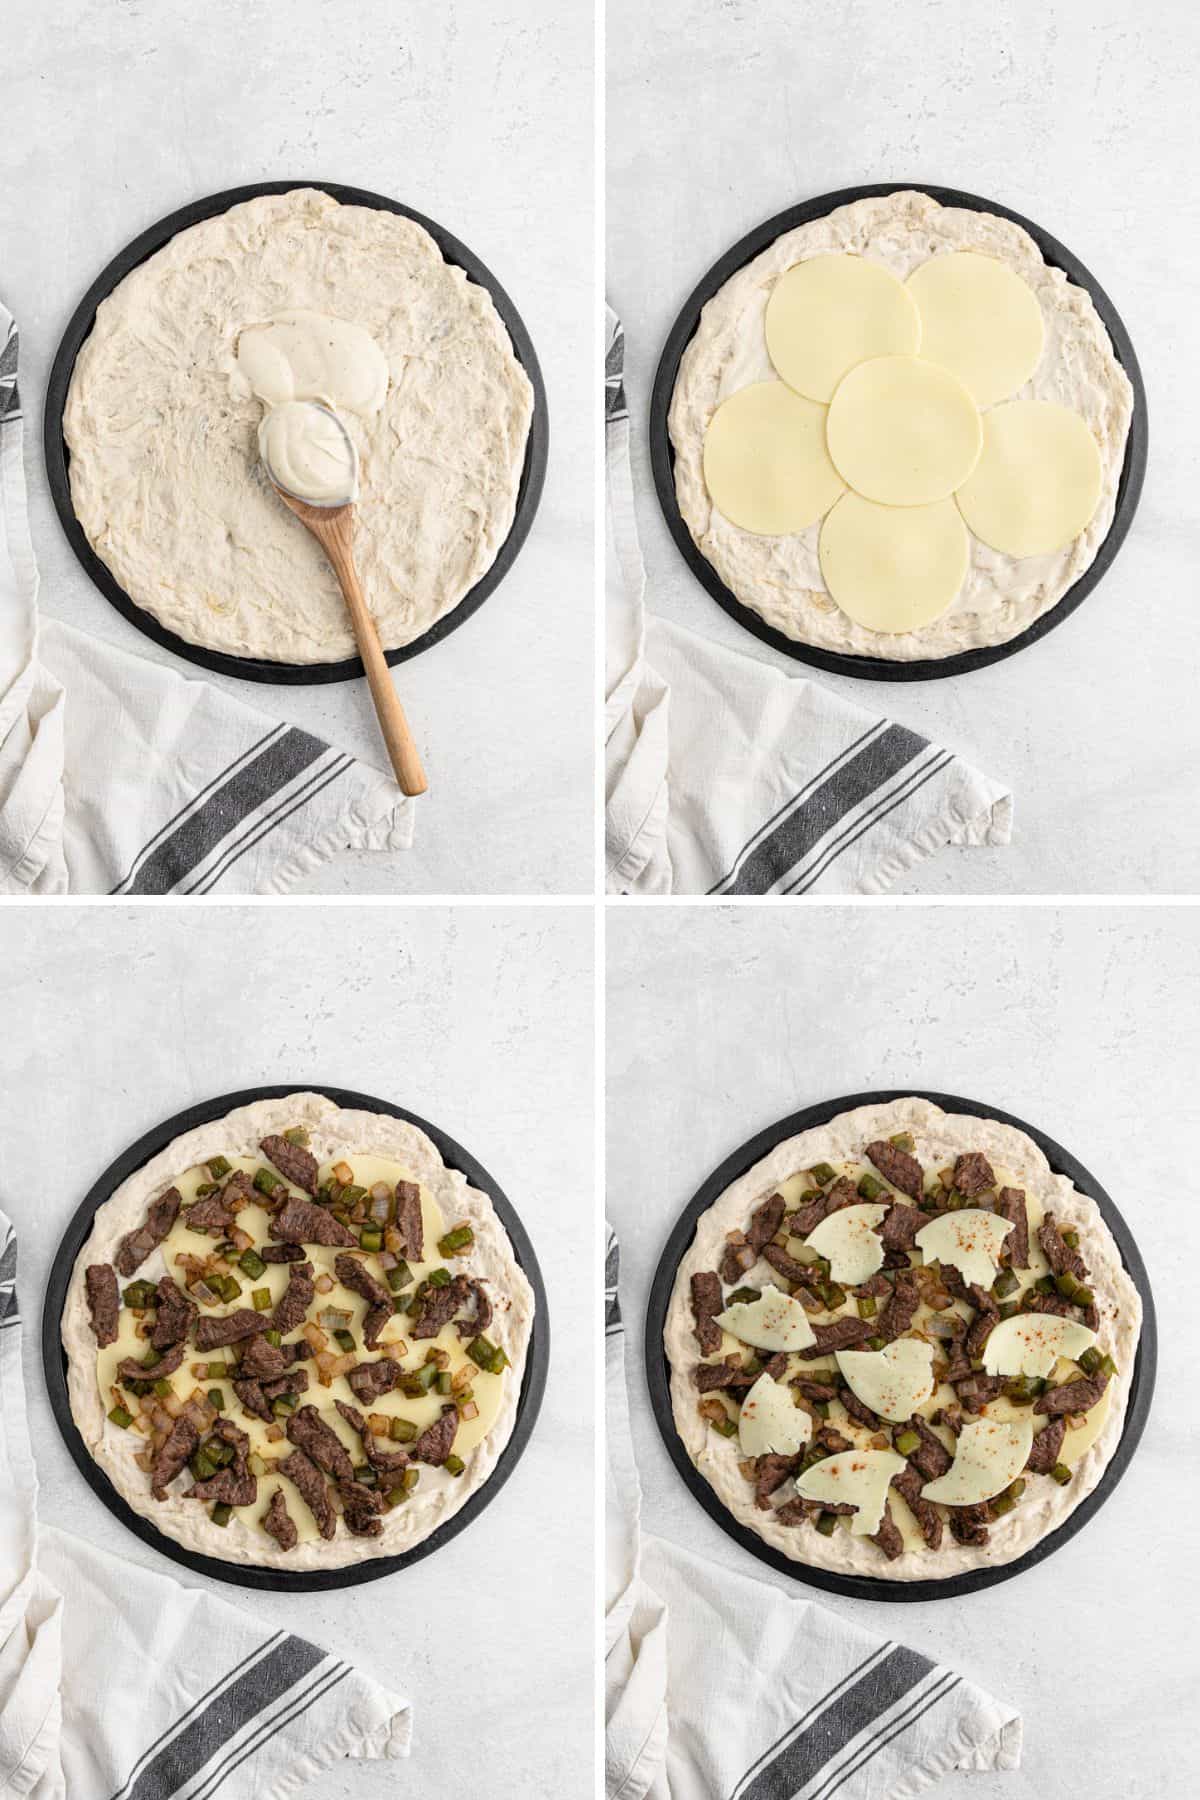 A collage showing the steps for assembling the pizza.